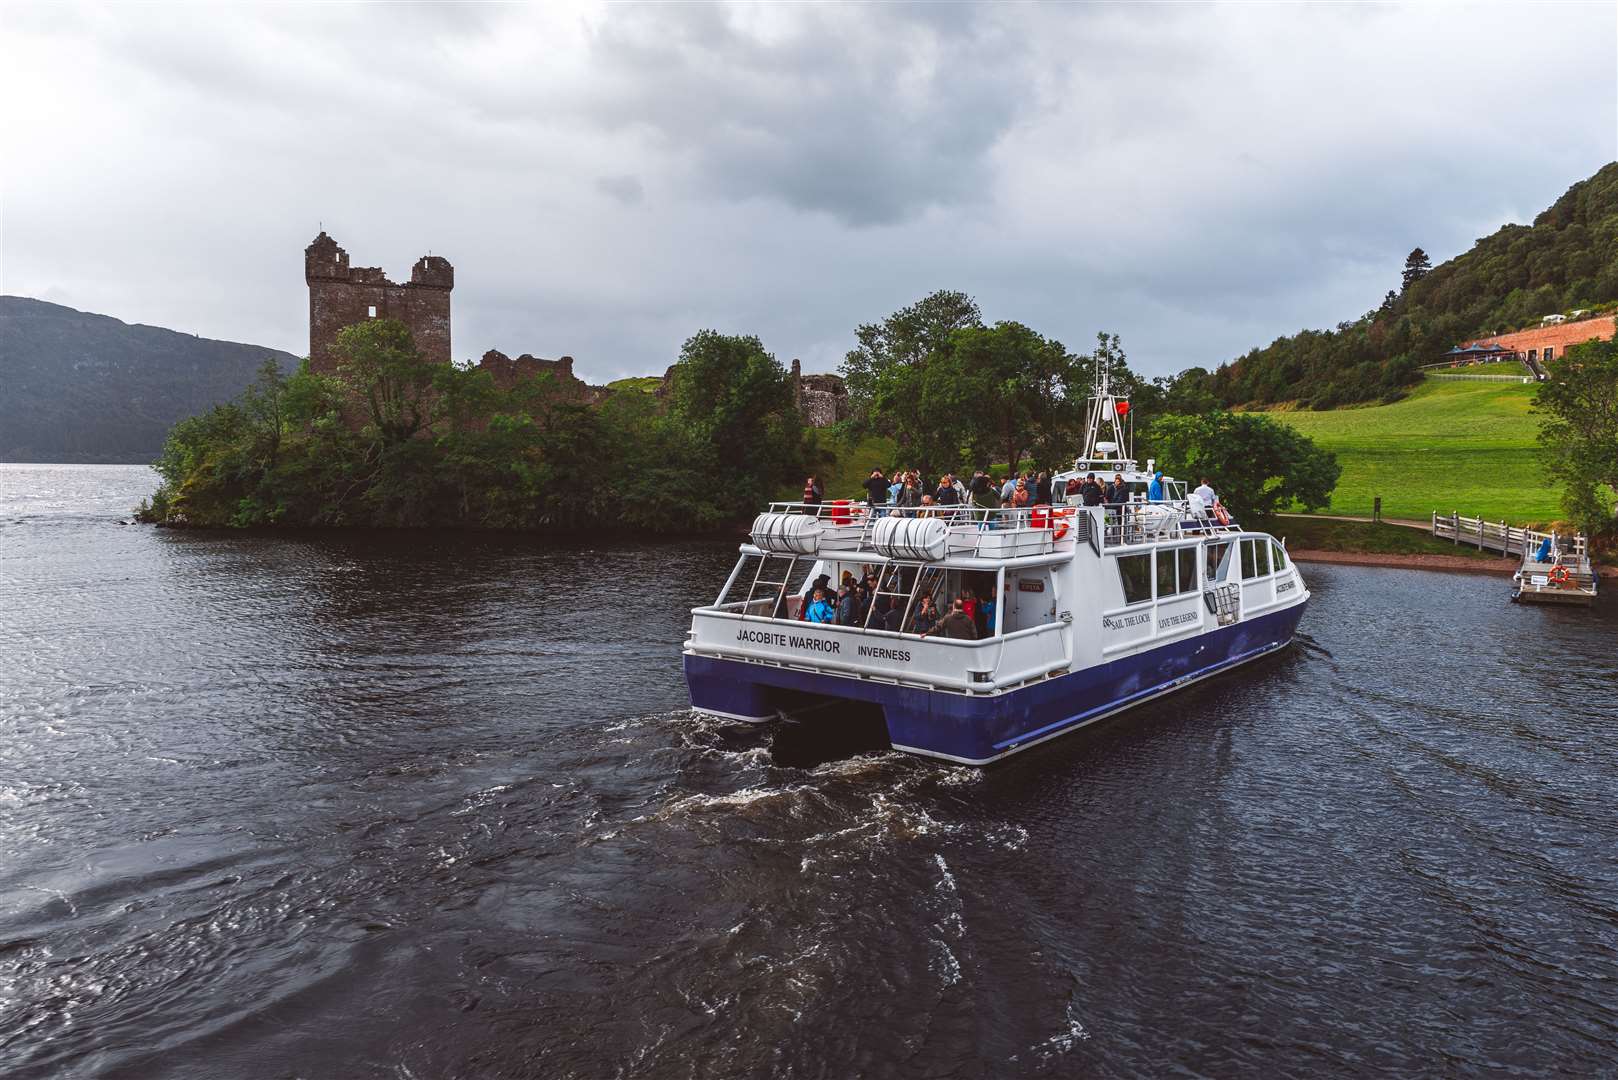 Loch Ness by Jacobite is an award-winning cruise business.